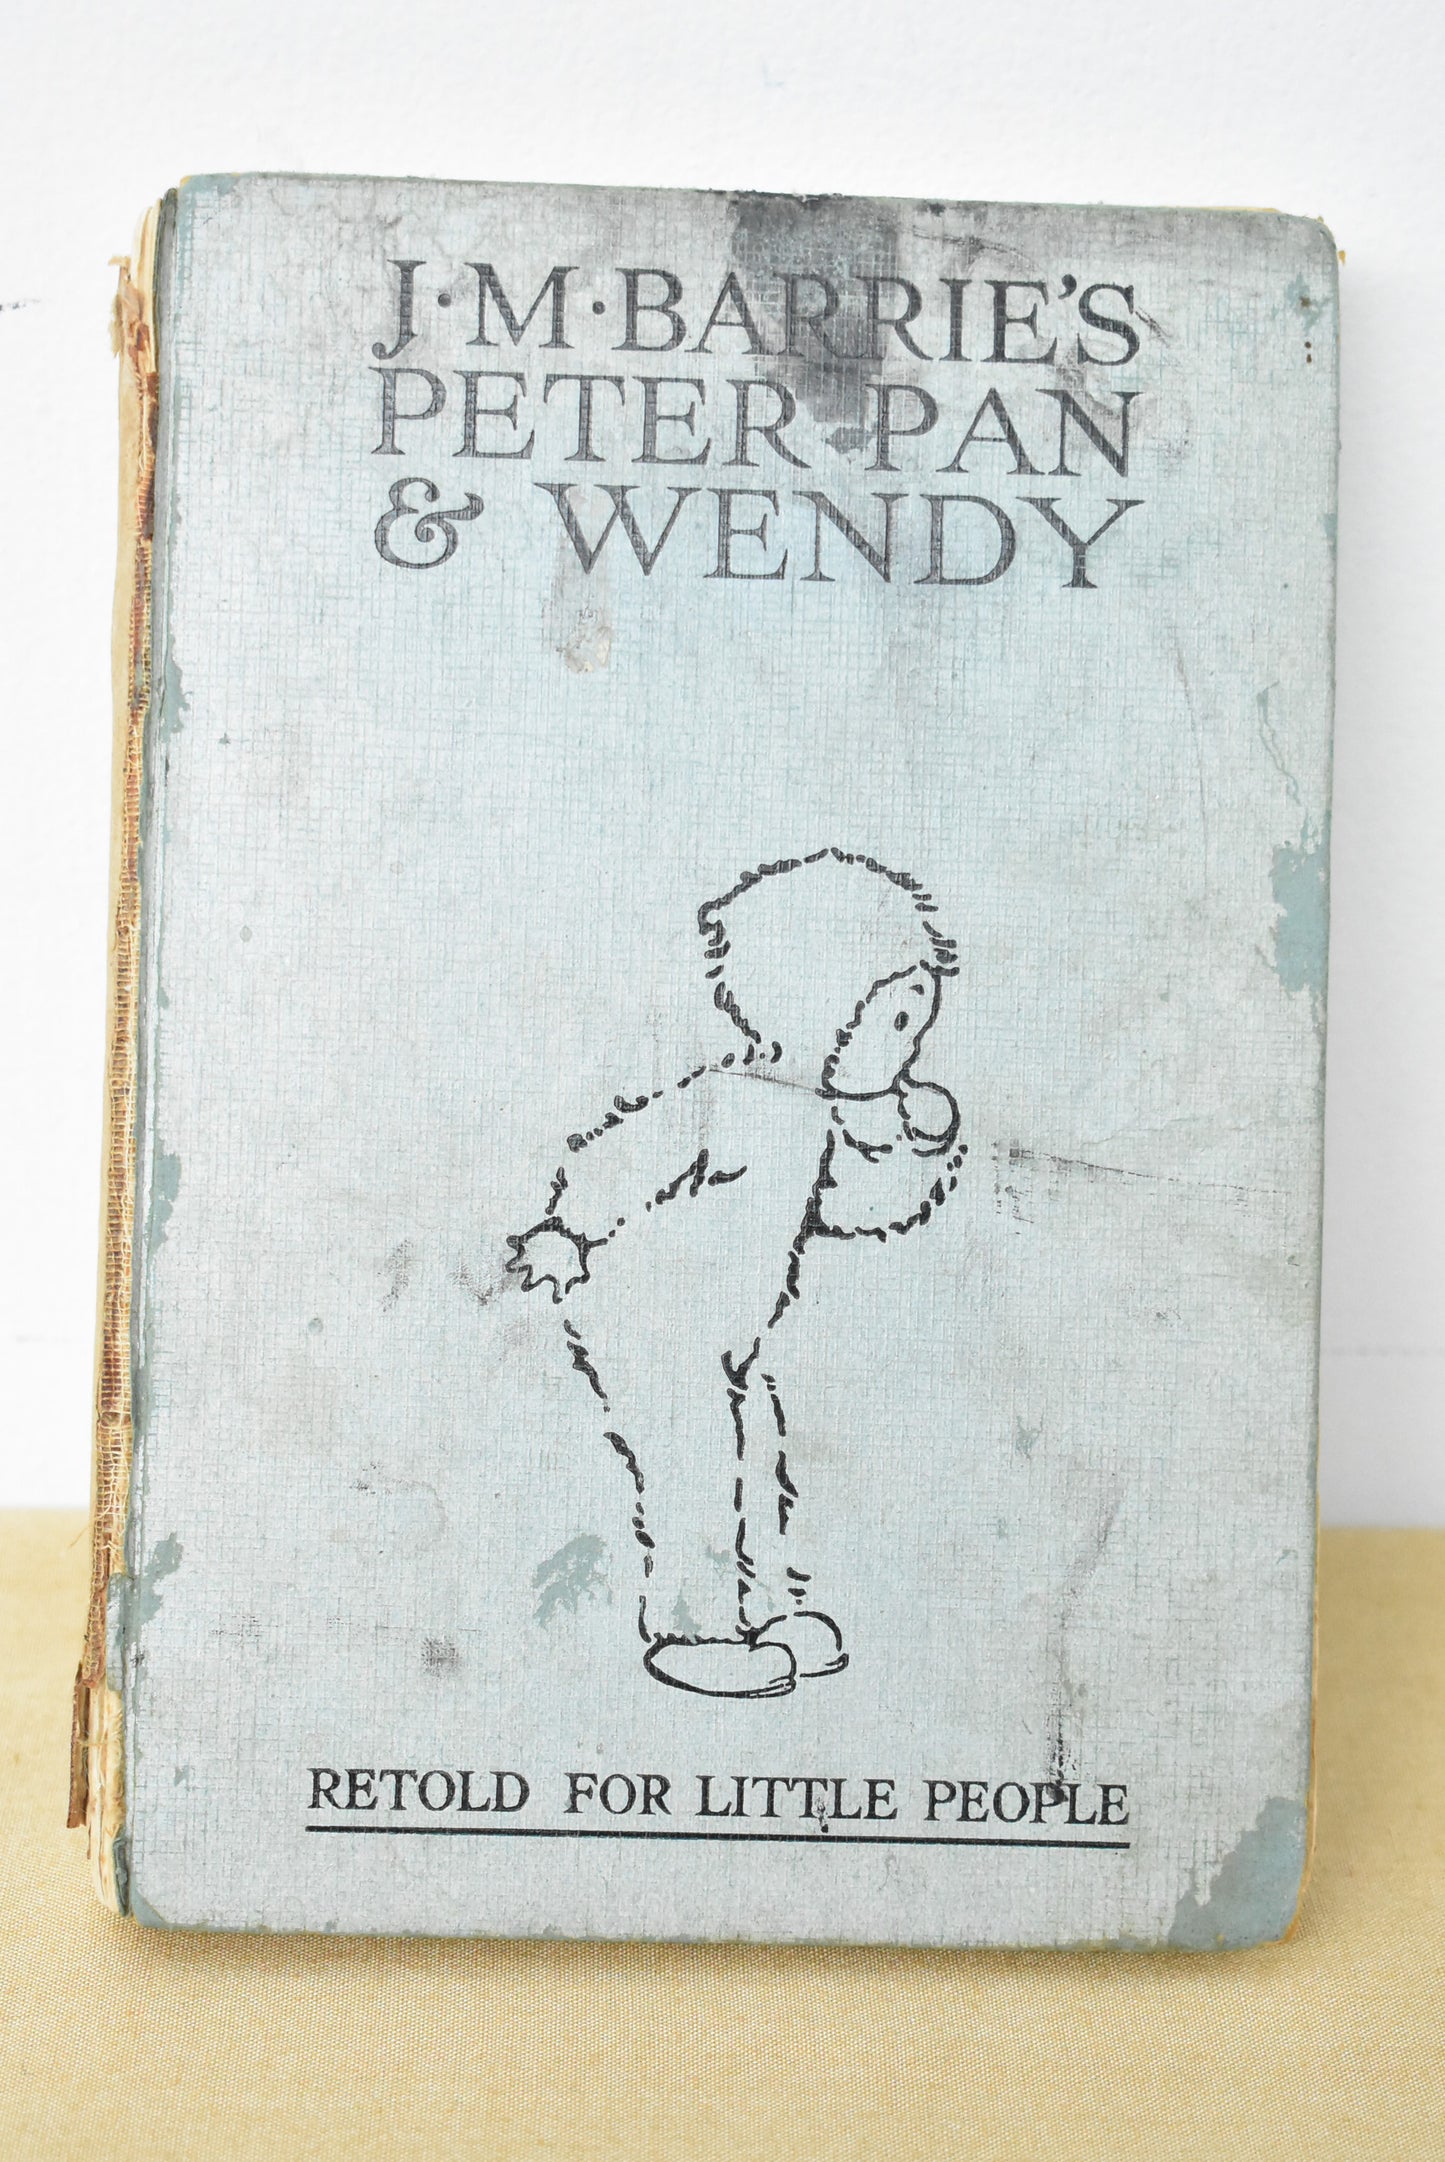 Vintage Peter Pan & Wendy, Retold for Little People, by JM Barrie